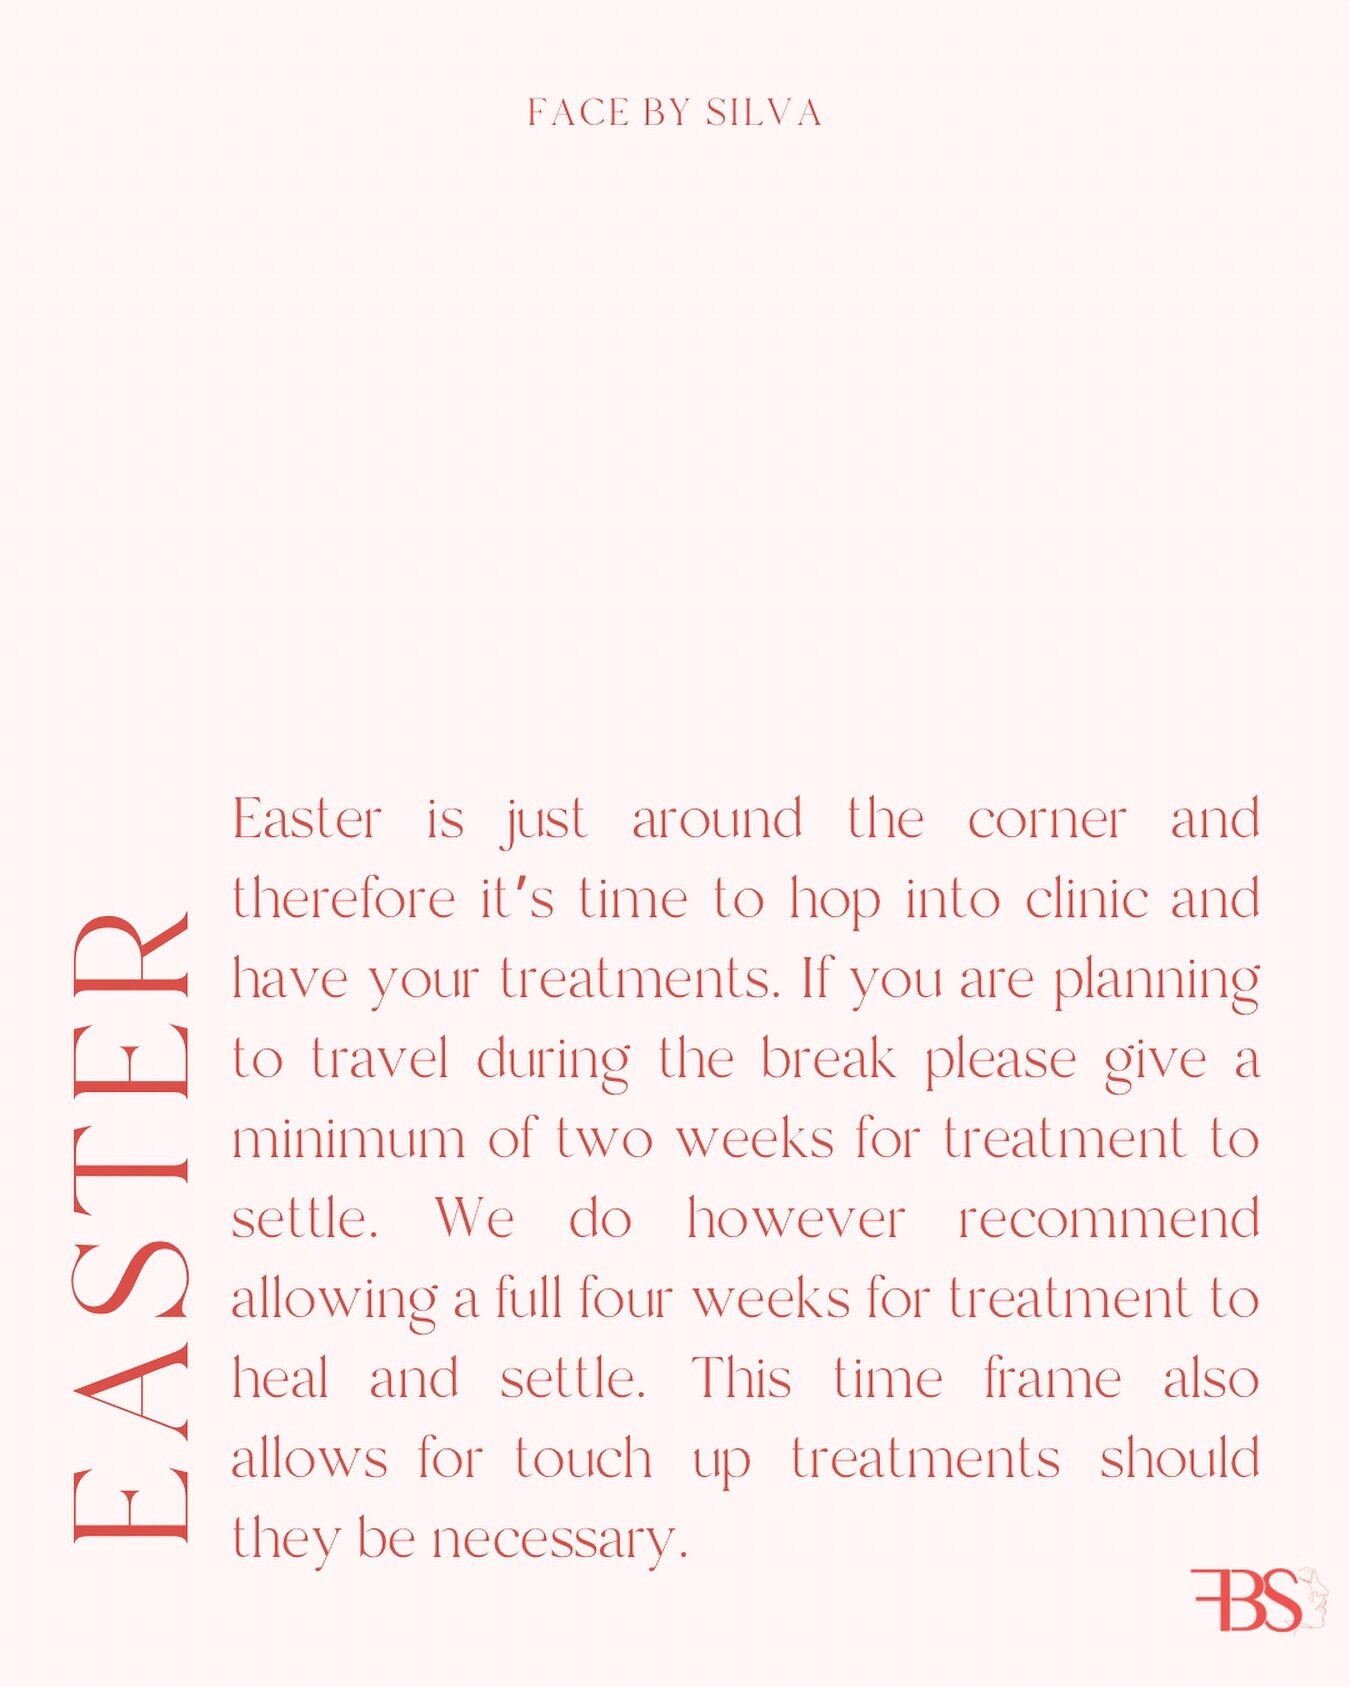 Easter is just around the corner and therefore it&rsquo;s time to hop into clinic and have your treatments!

Head to the link in our bio or use the details below to secure your spot and beat the Easter rush. 

FACE BY SILVA
Location details below ⬇️ 